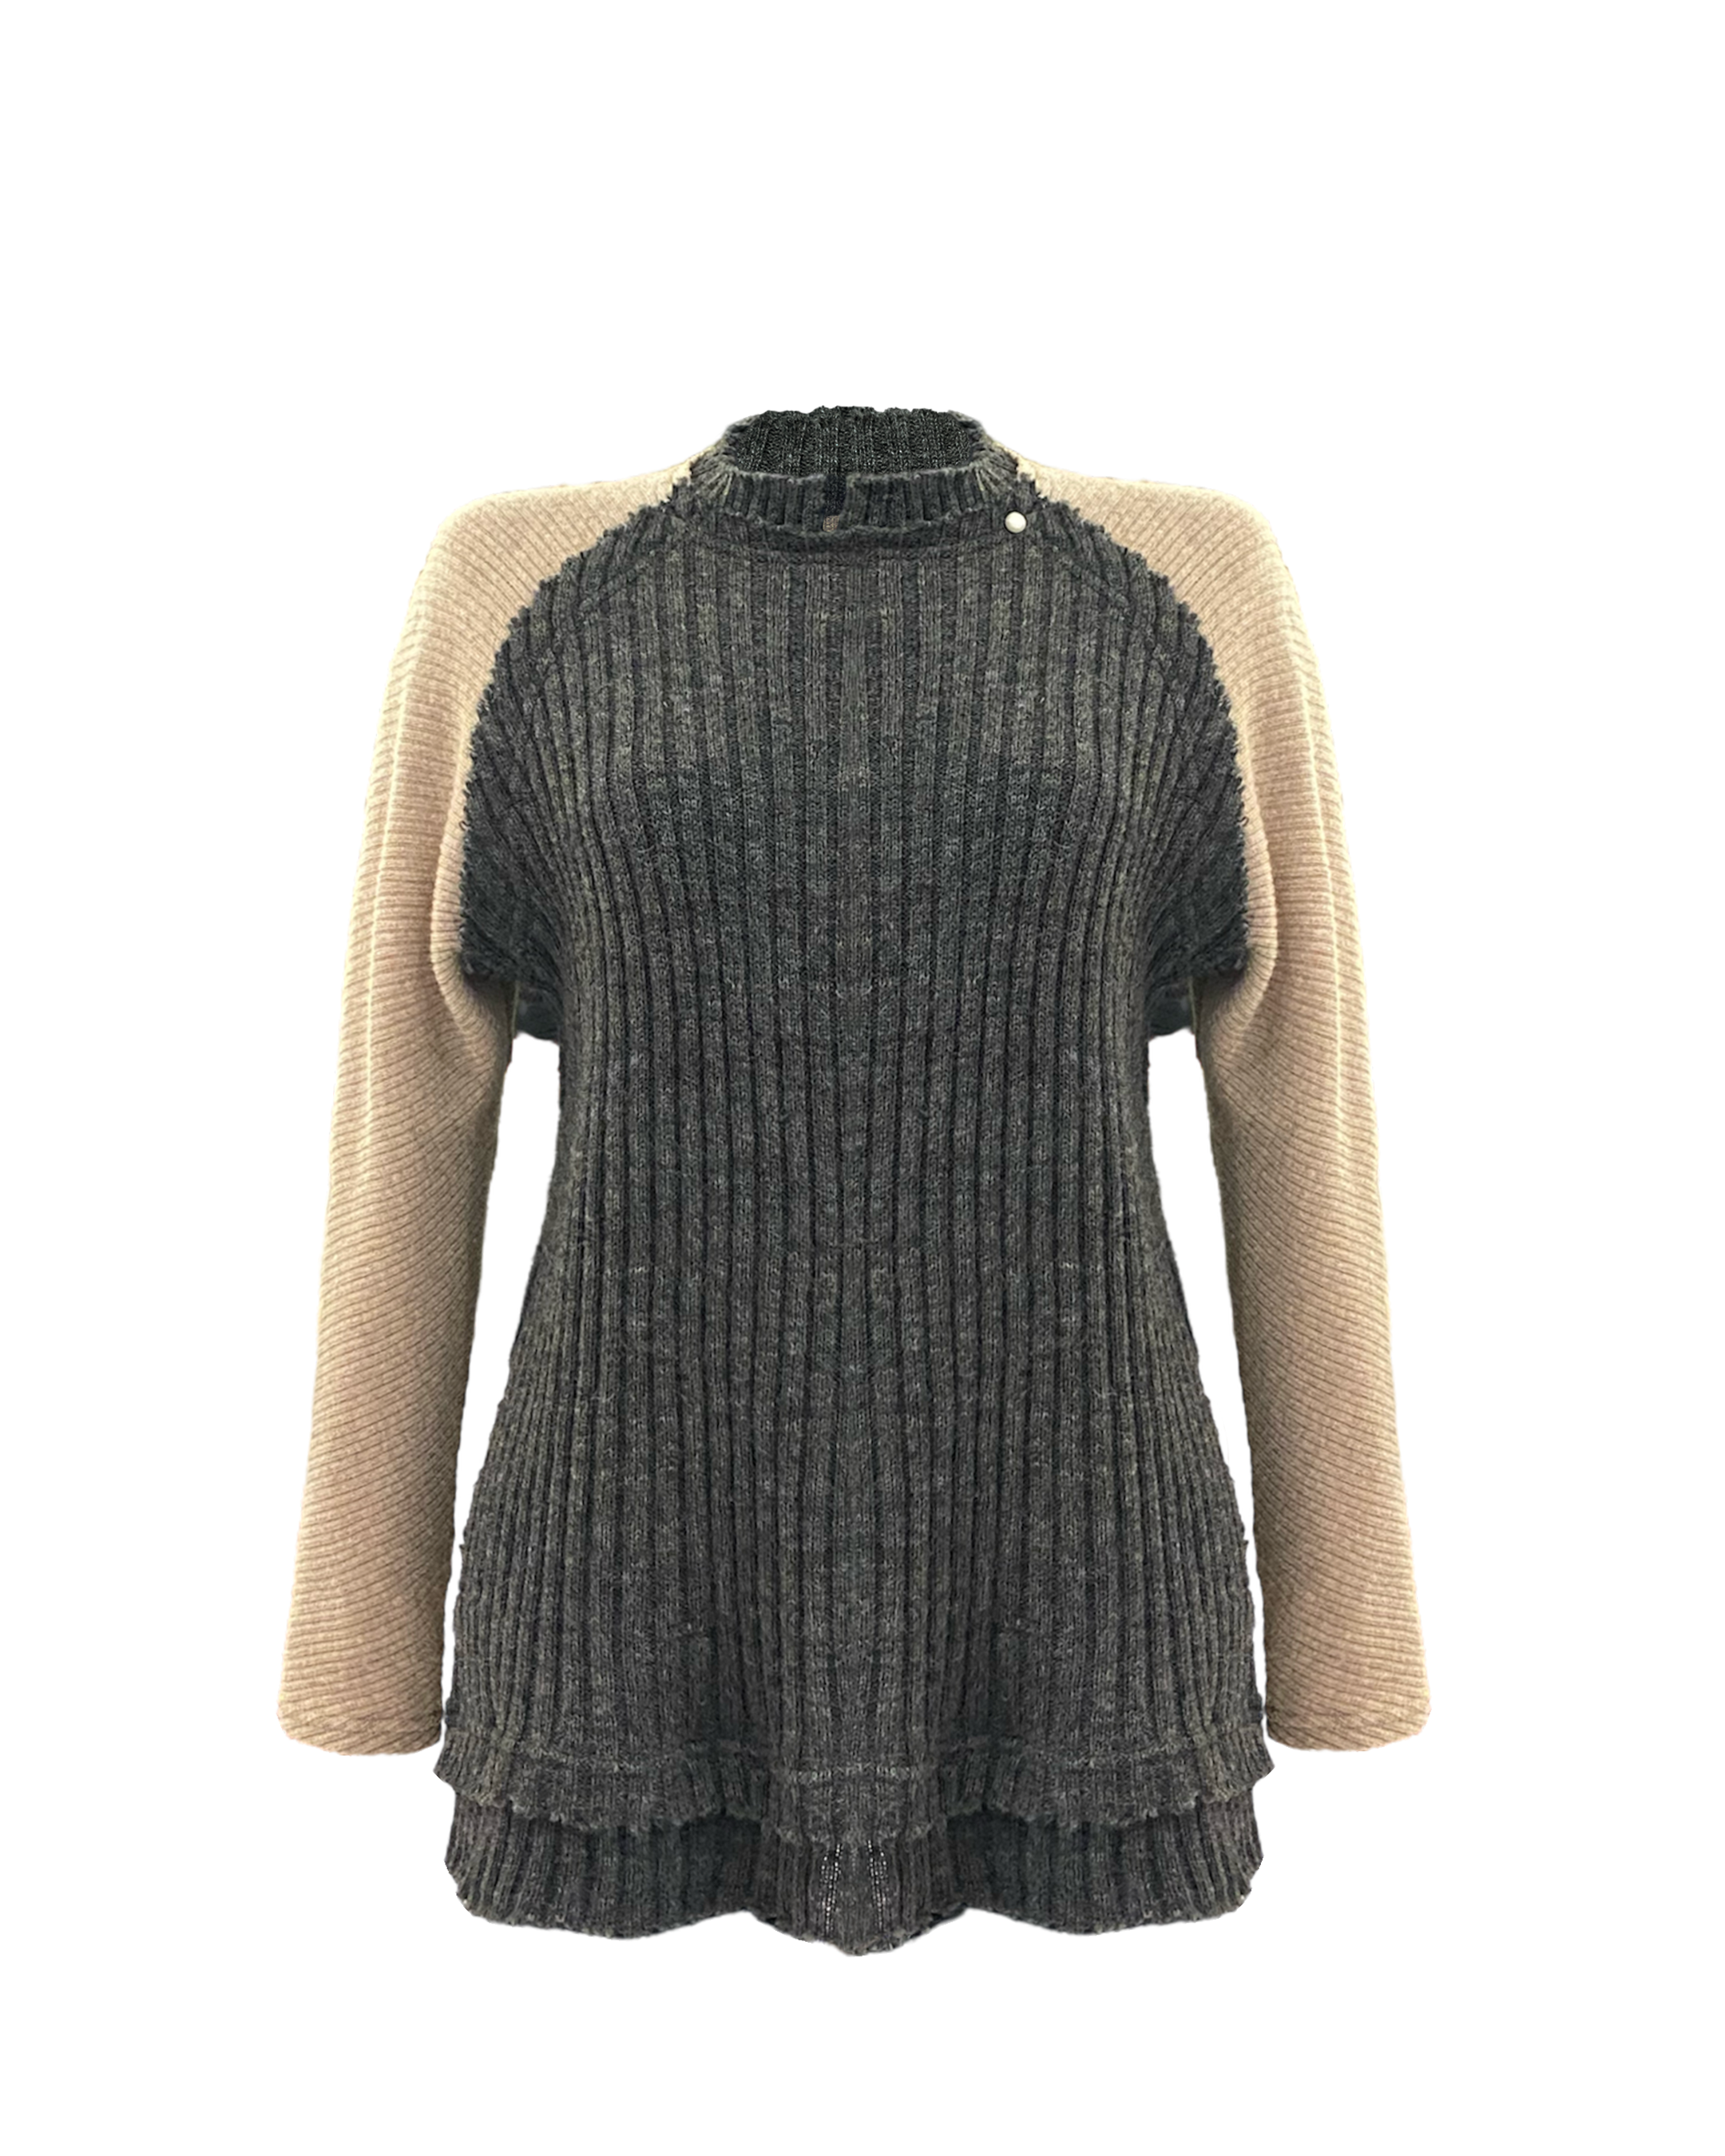 GREY TOP WITH BEIGE LONG SLEEVES AW23/24